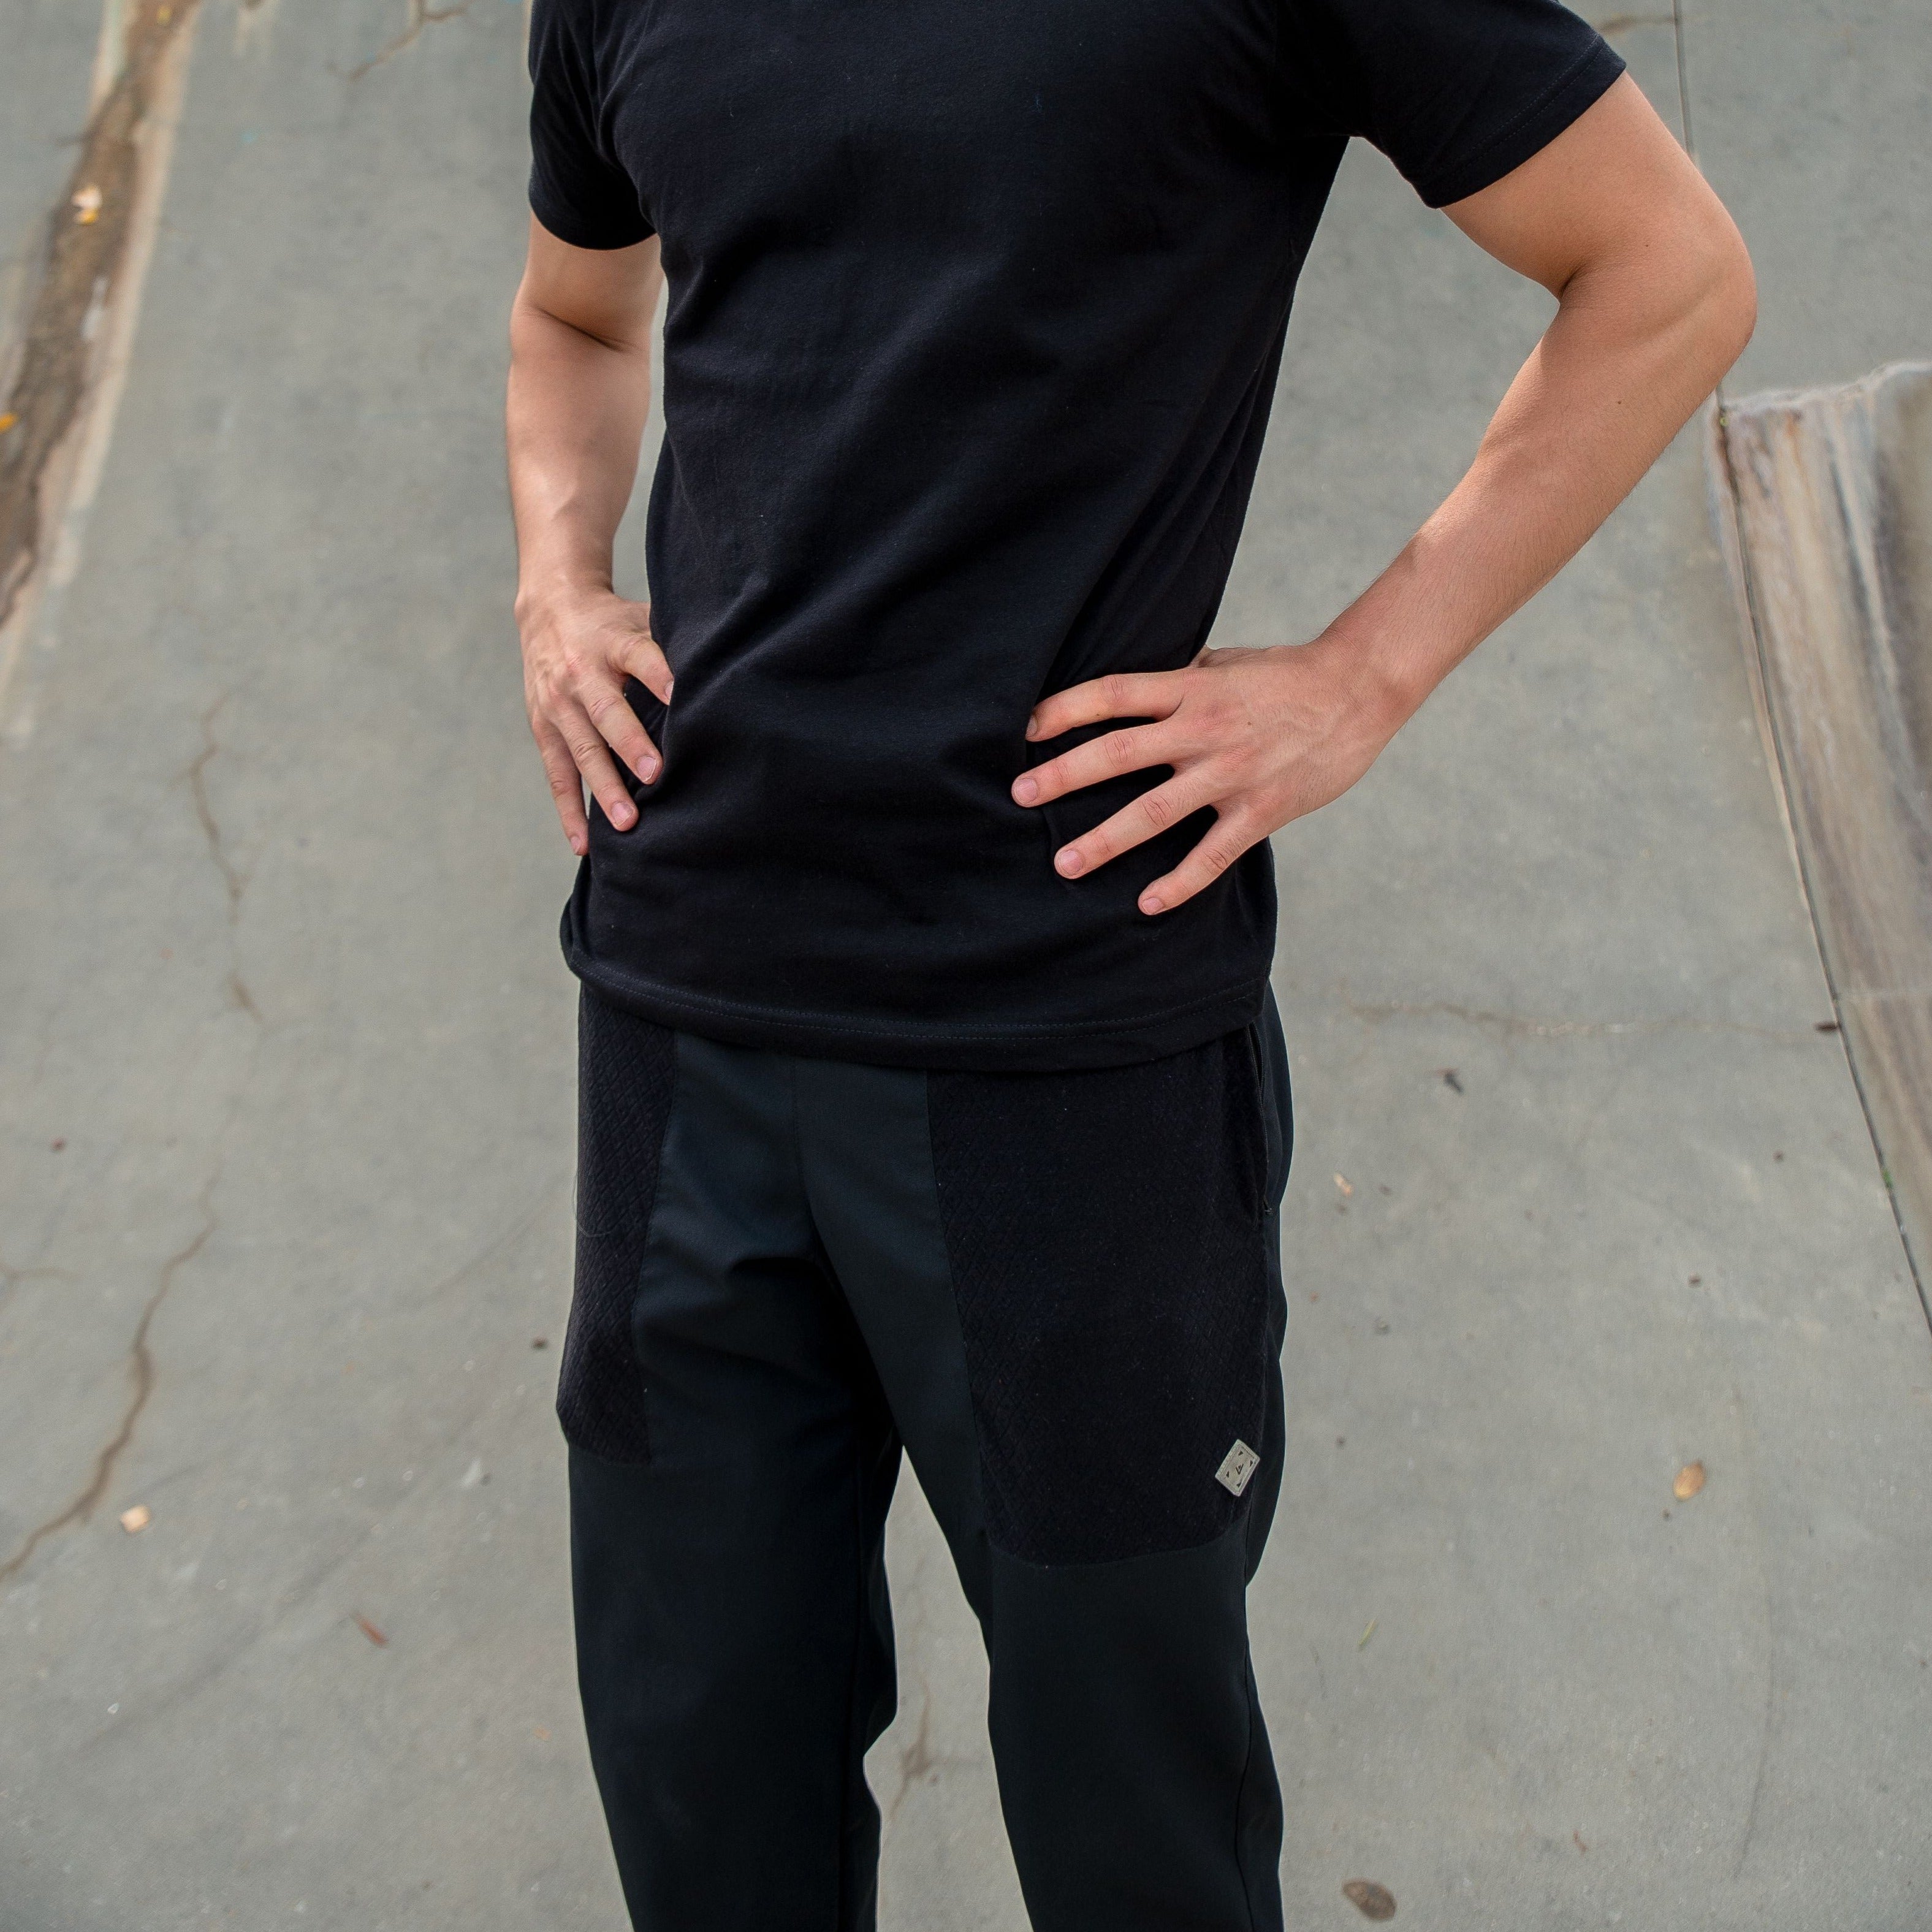 Hearthstone POINT3 DRYV Black Joggers - Model View